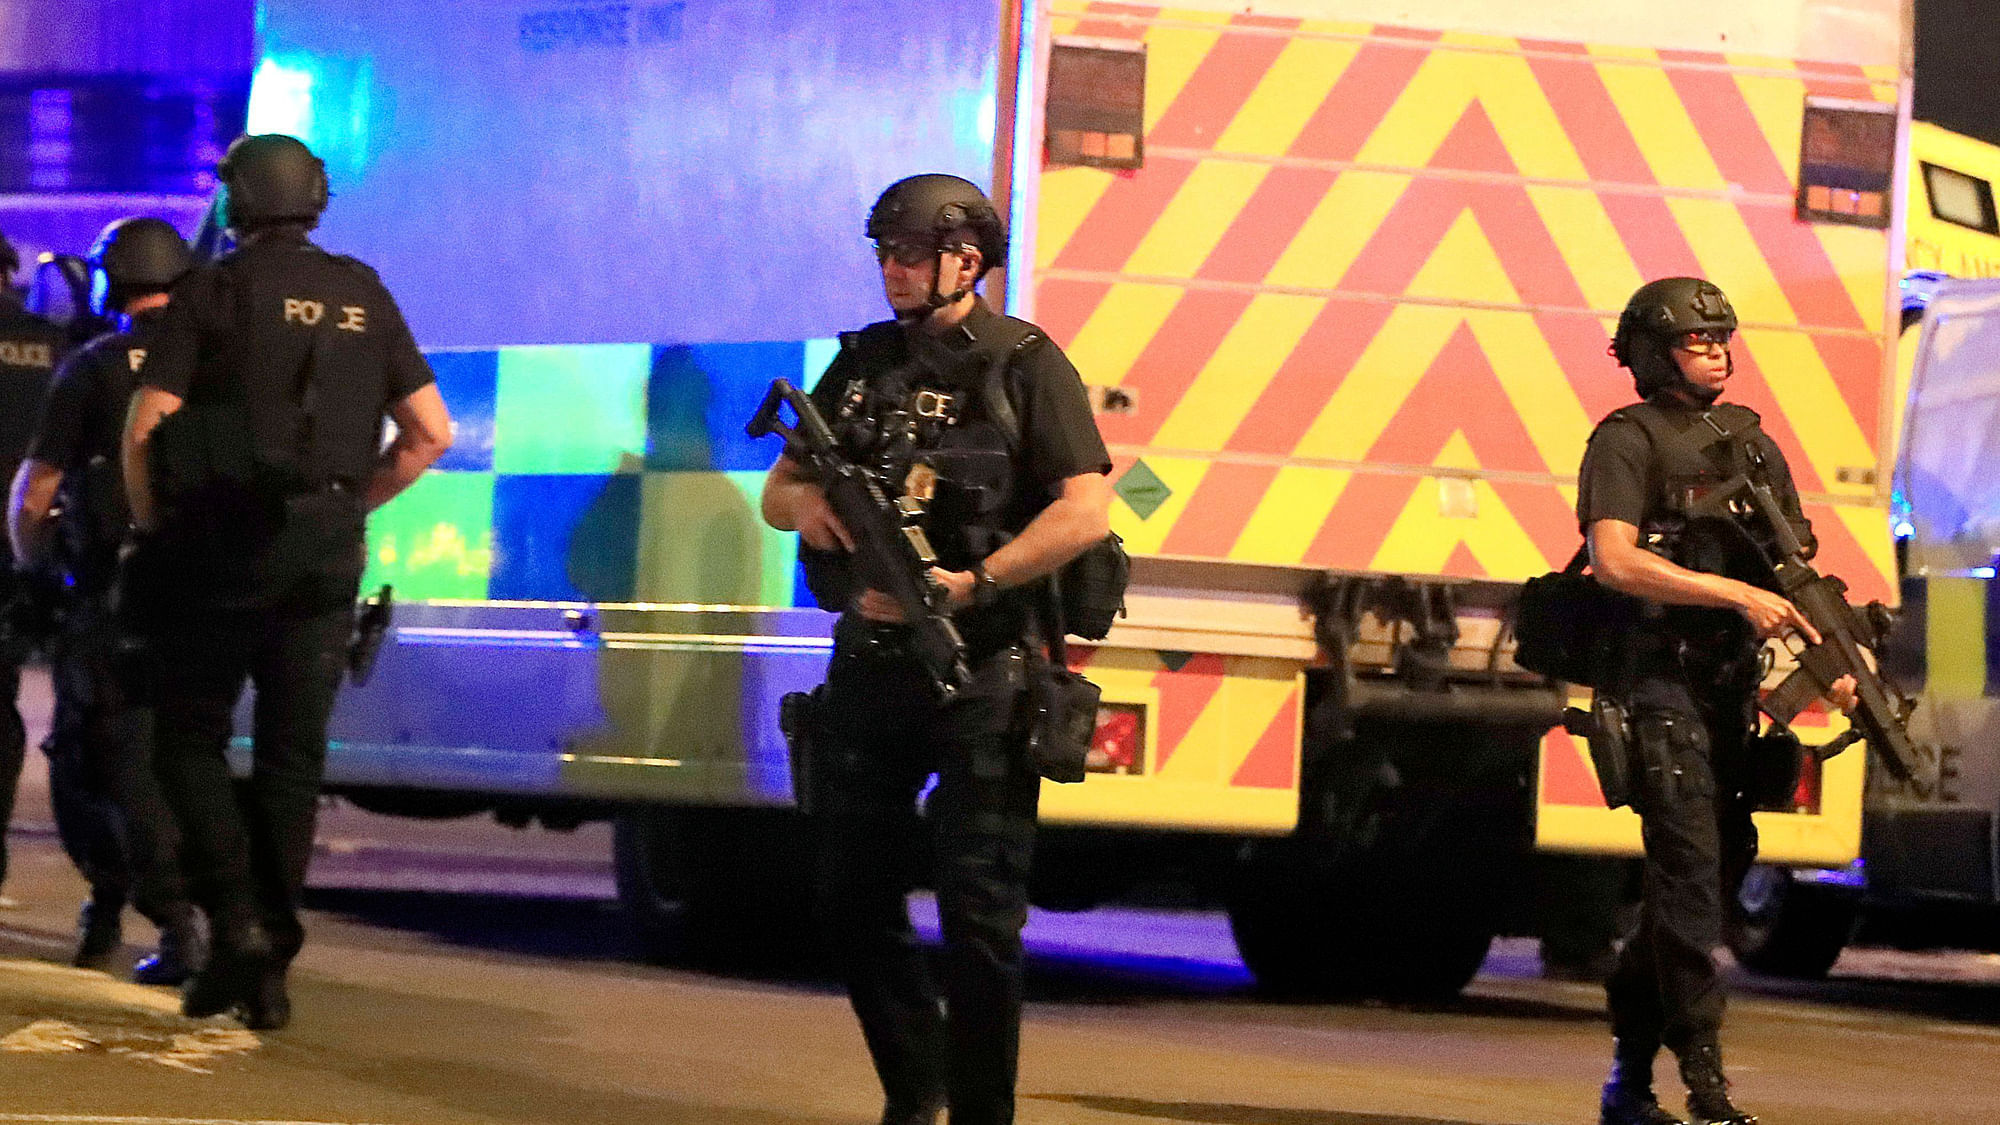 Armed policemen near  Manchester Arena where an explosion took place during an Ariana Grande concert on 22 May. (Photo Courtesy: Peter Byrne/AP)